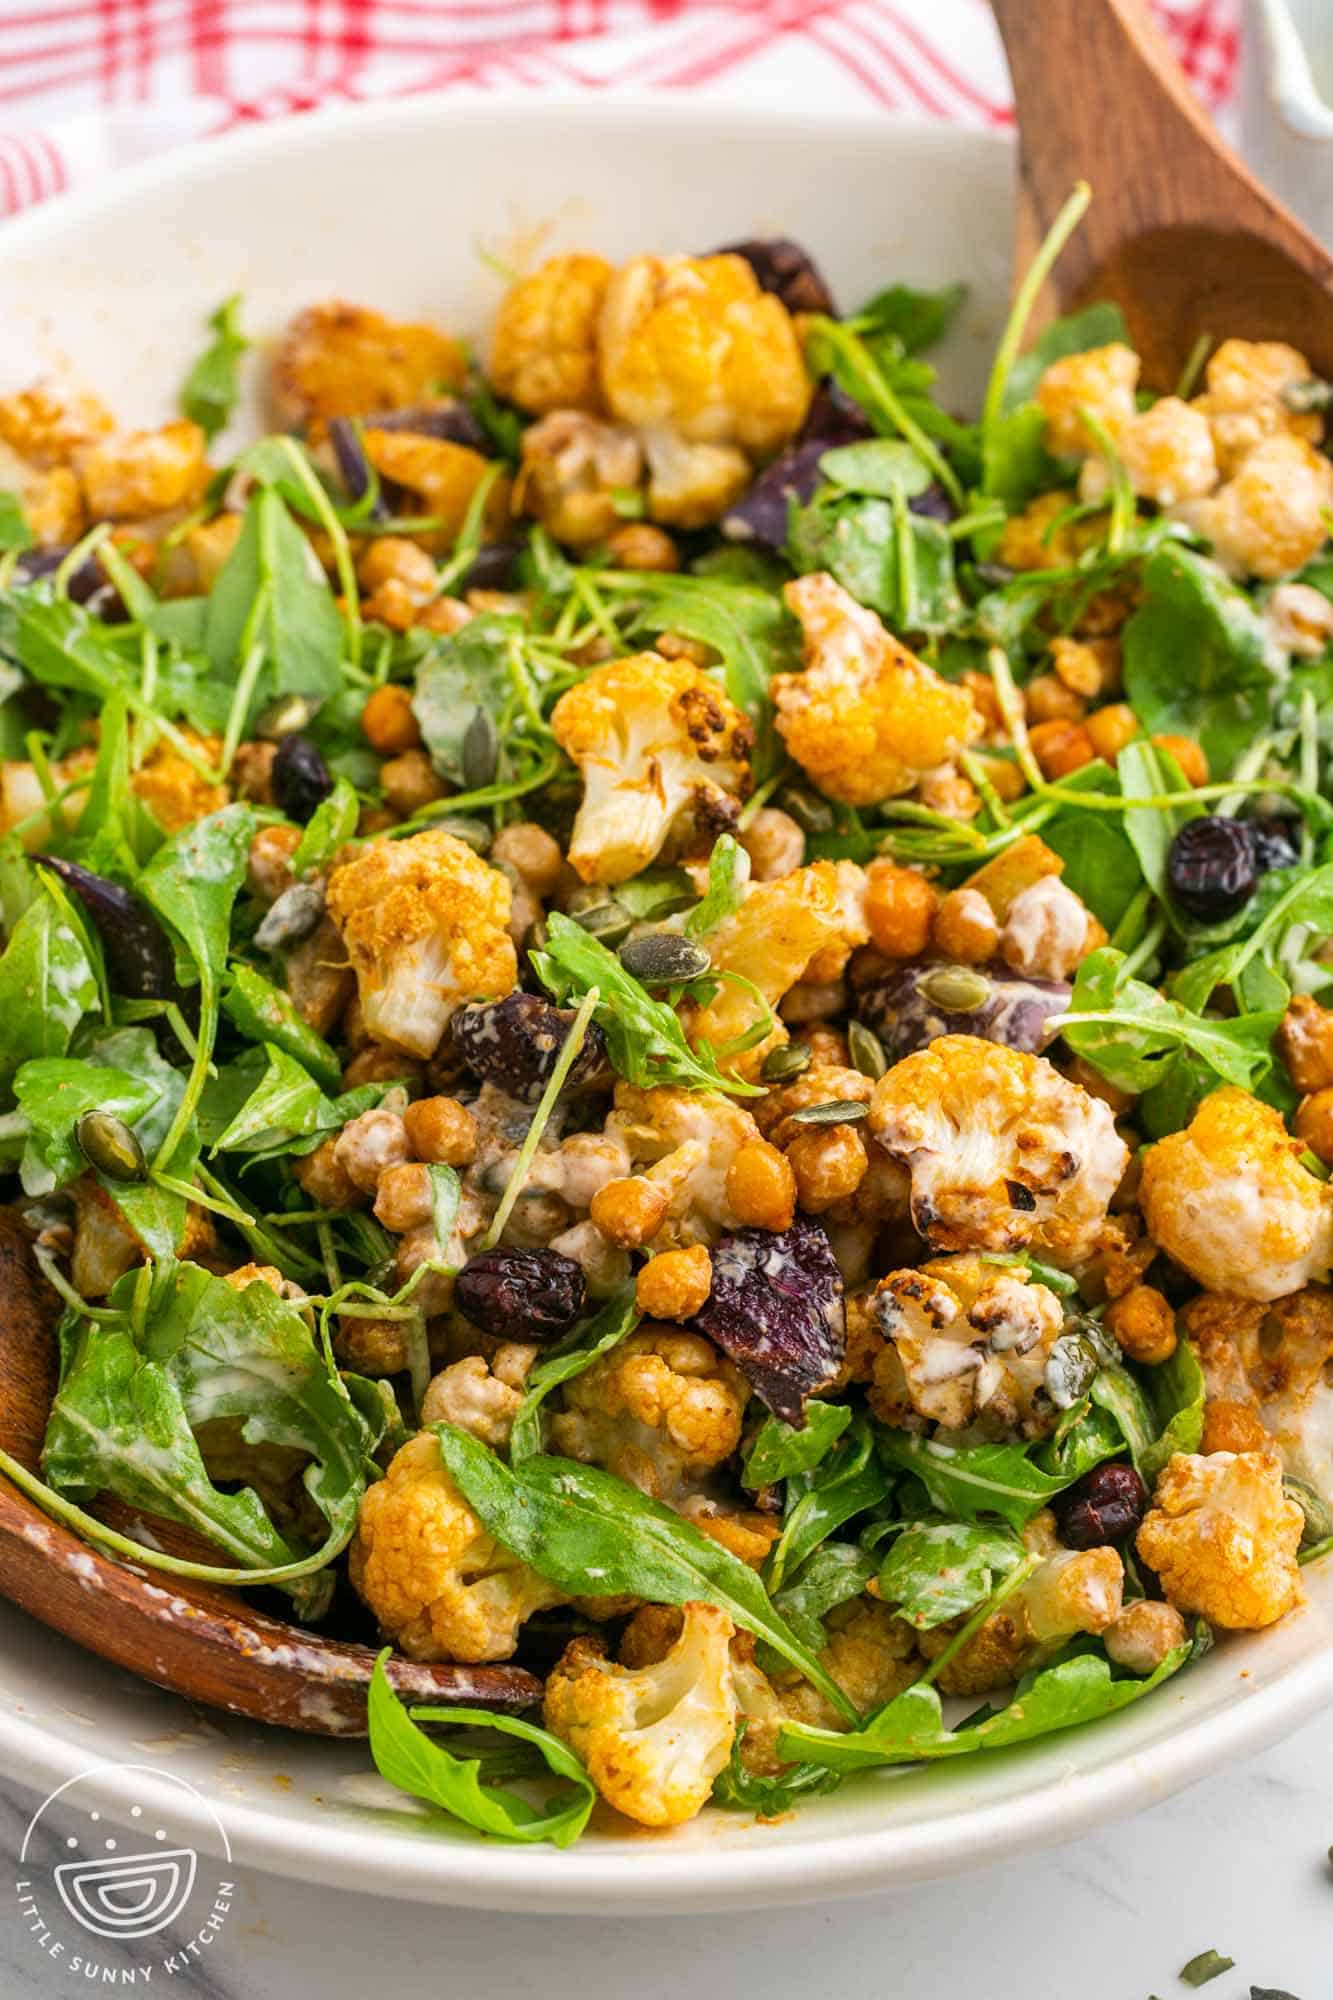 Roasted cauliflower salad with arugula in a large white bowl, and wooden servers on the sides.